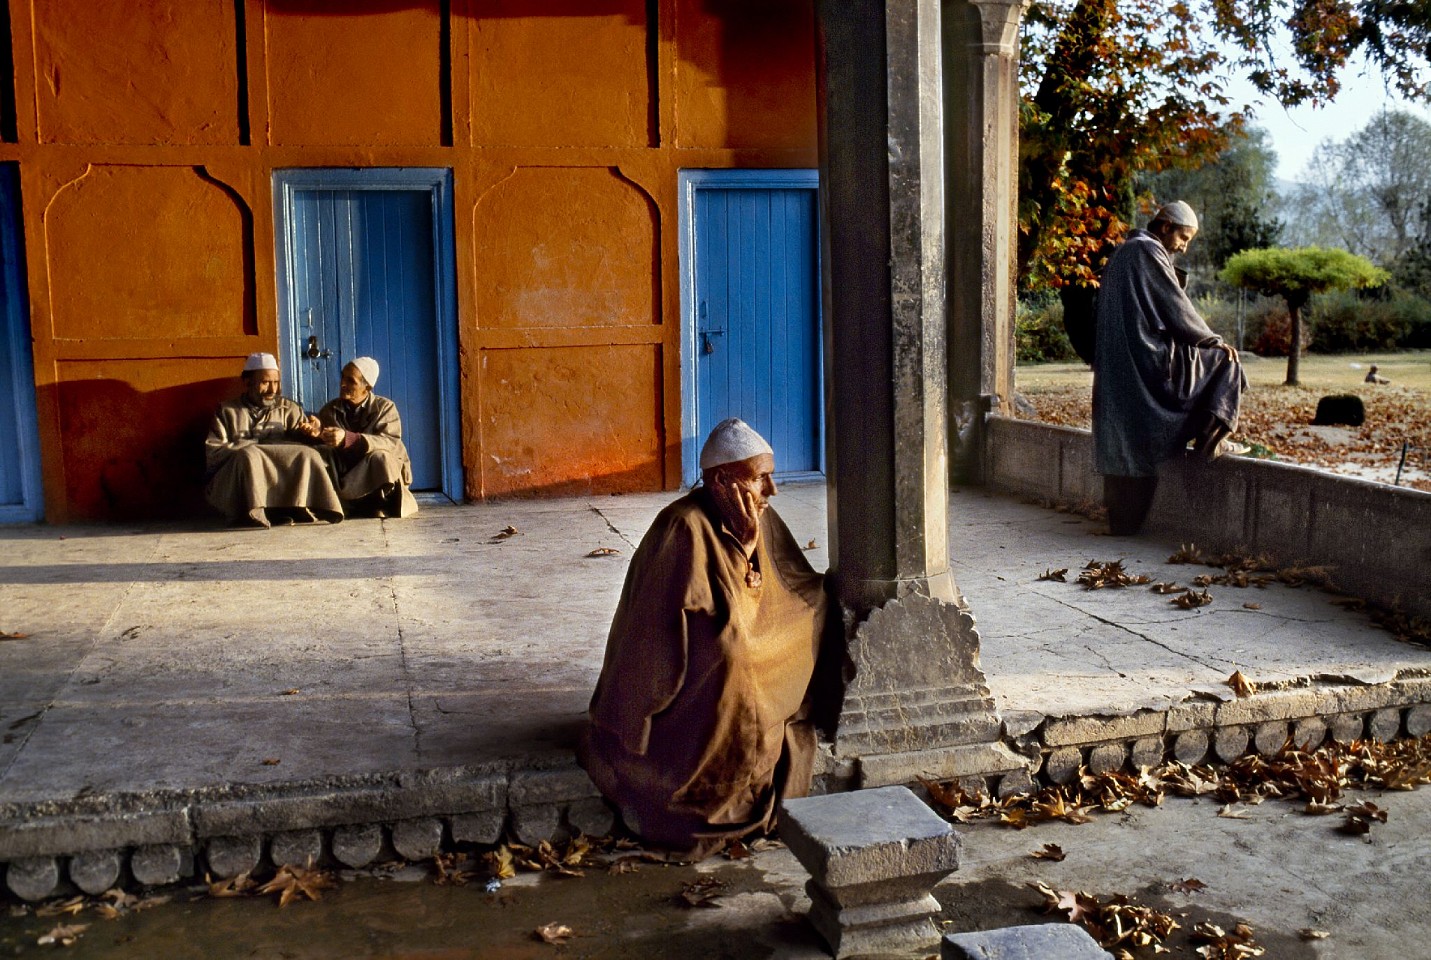 Steve McCurry, Shalimar Bagh Mugal Garden, 1998
FujiFlex Crystal Archive Print
Price/Size on request